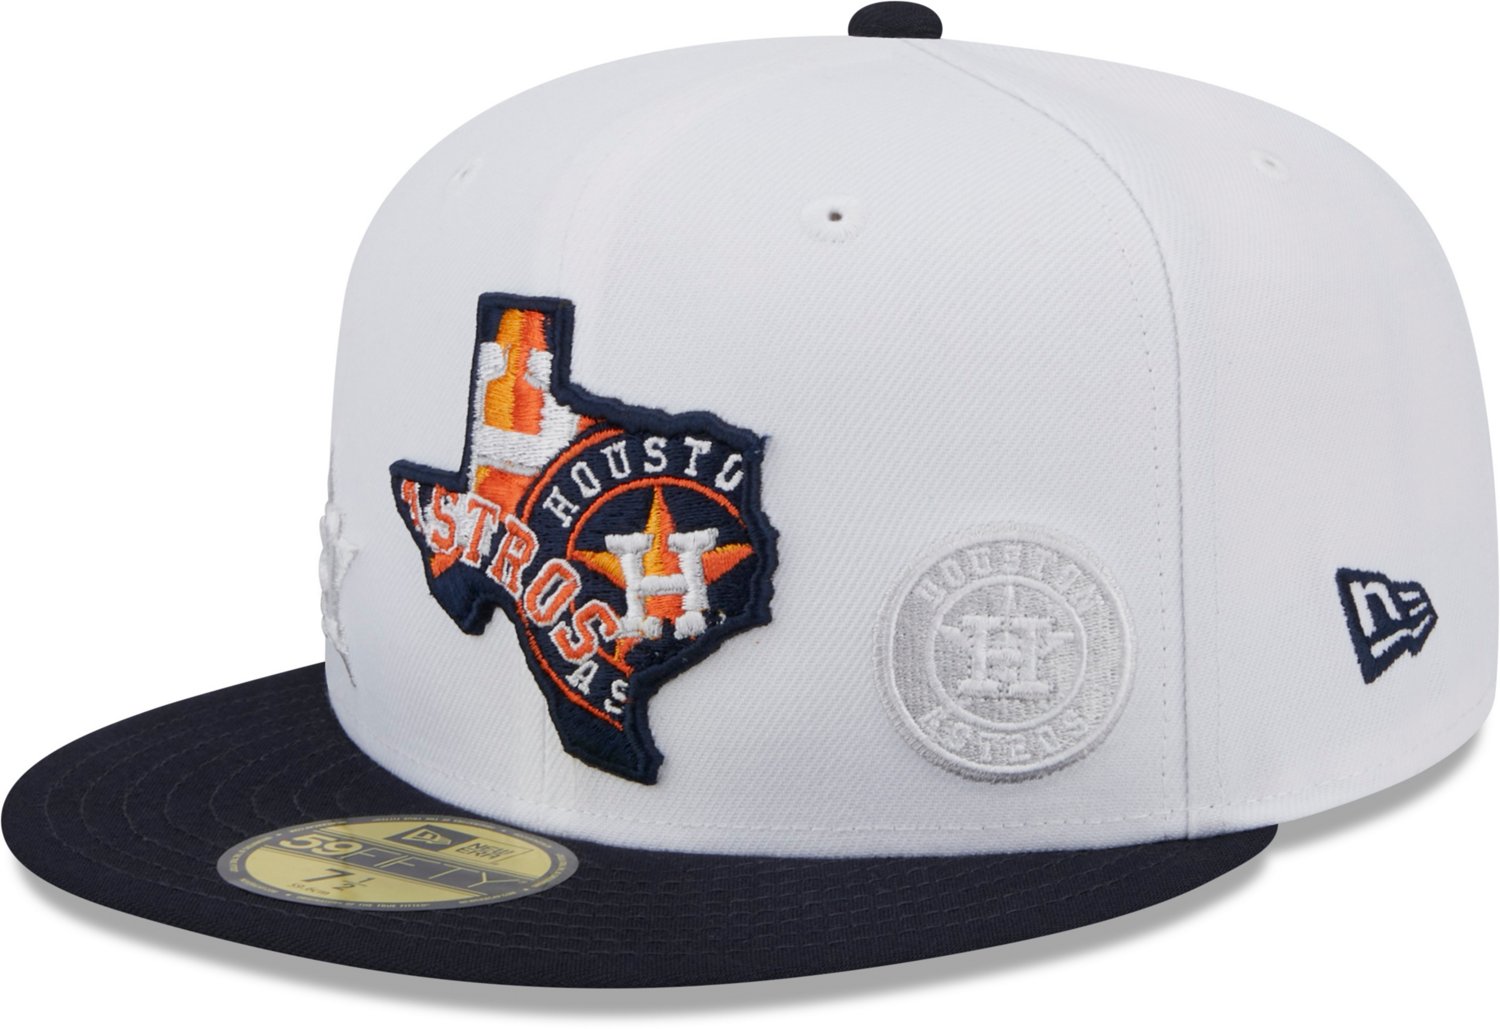 Men's New Era Camo Houston Astros Autumn 59FIFTY Fitted Hat